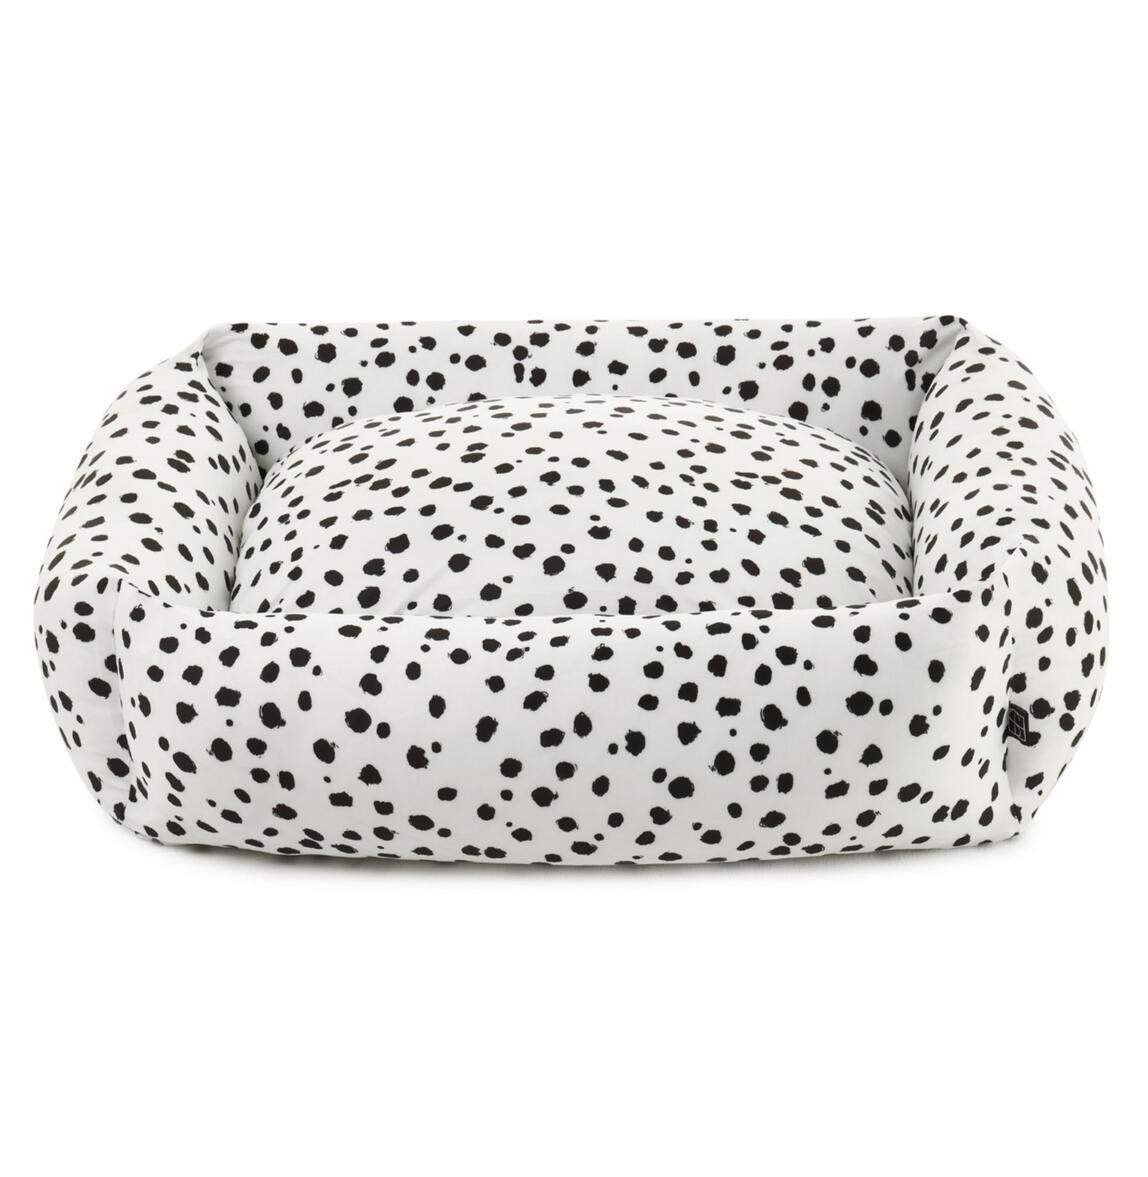 Settle Beds - Dalmatian Dog Bed